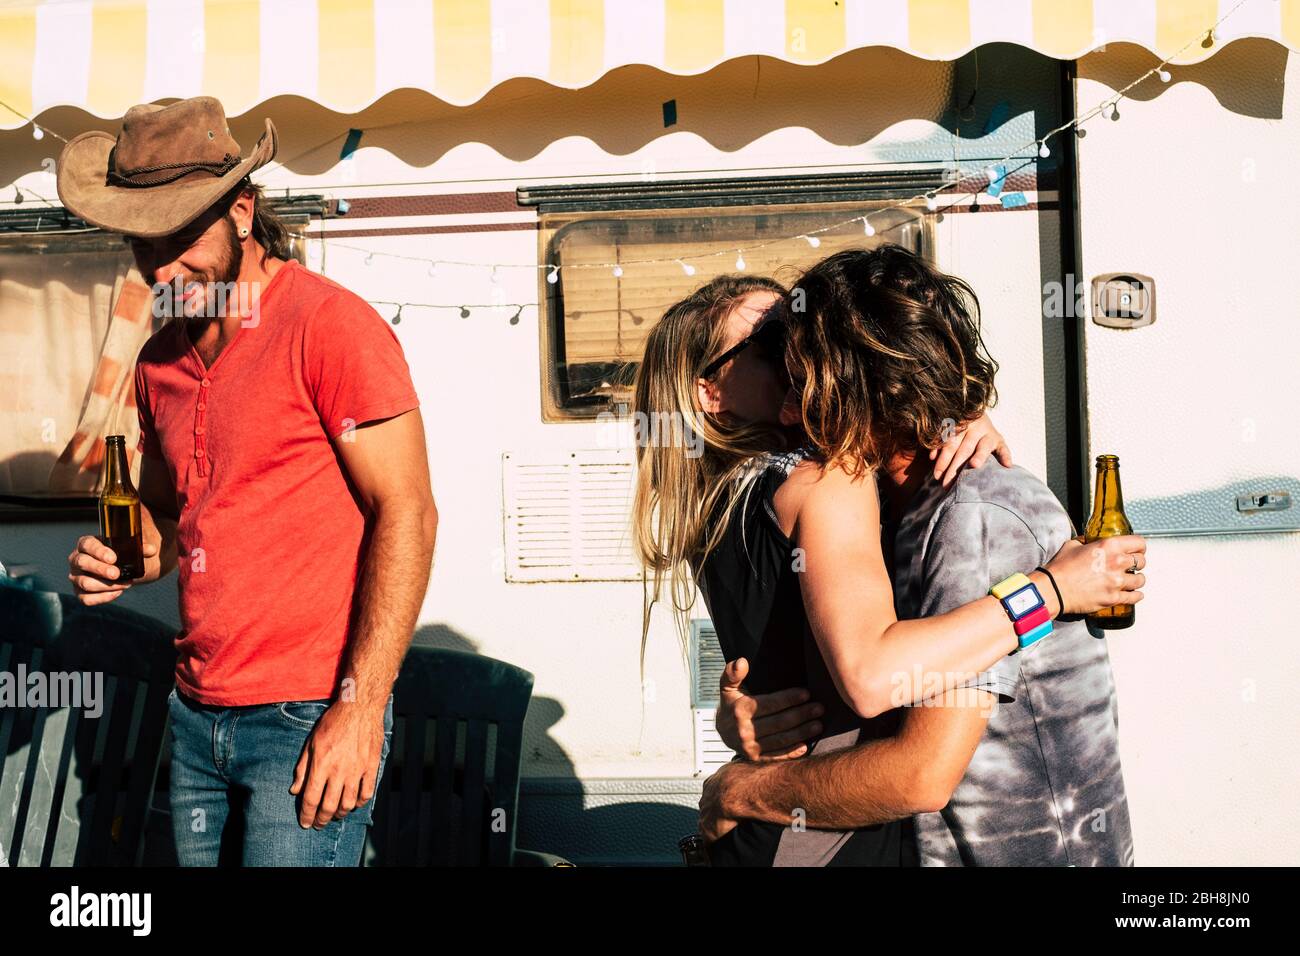 Couple of young people kissing with love with a friend walking in the back and smiling - youthful generations like travel and enjoy the outdoor adventure - old caravan in background Stock Photo